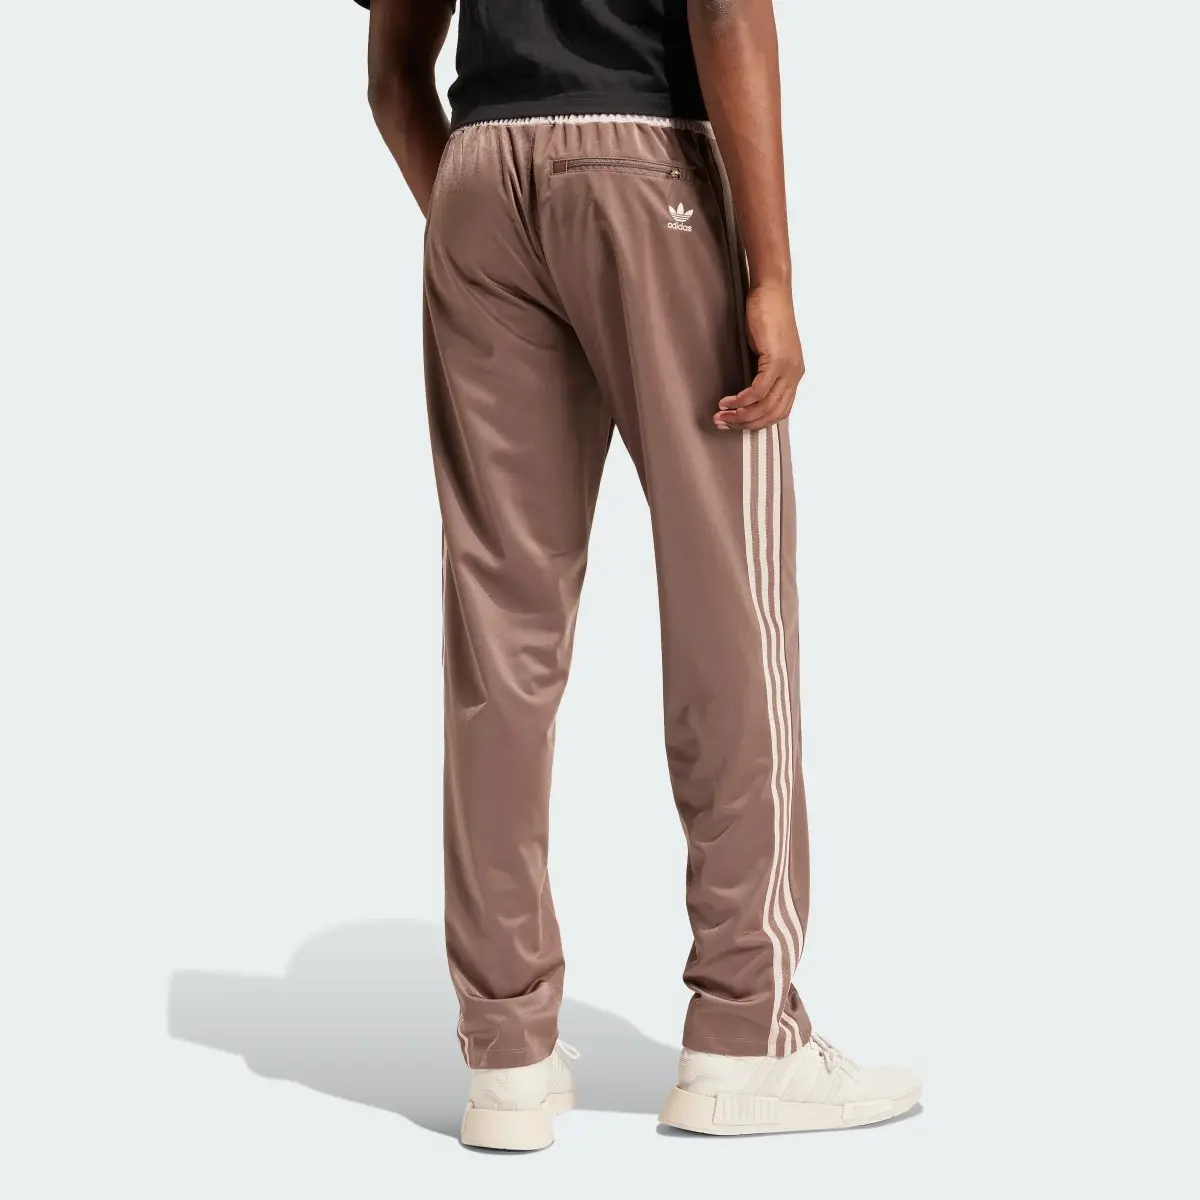 Adidas Track Tracksuit Bottoms. 3